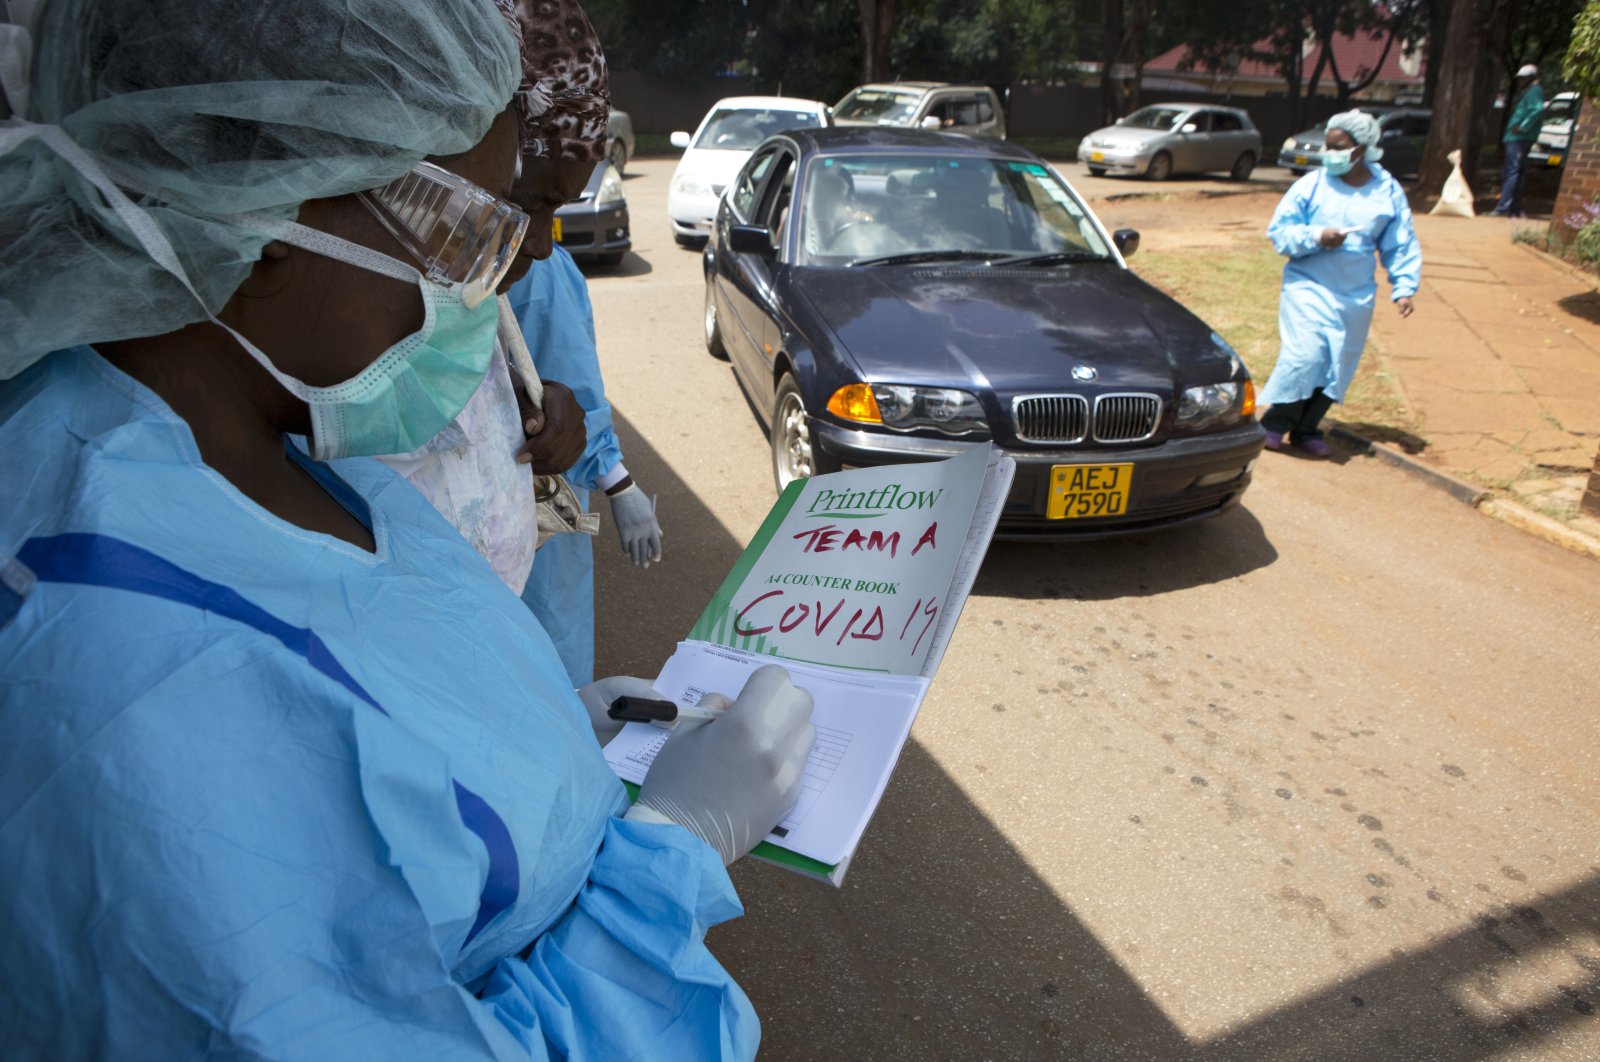 Health workers screen motorists and people visiting a public hospital in Harare, Zimbabwe, Saturday, March 21, 2020, after Zimbabwe announced its first case of coronavirus, in one of Africa's most visited tourist spots. (AP Photo)